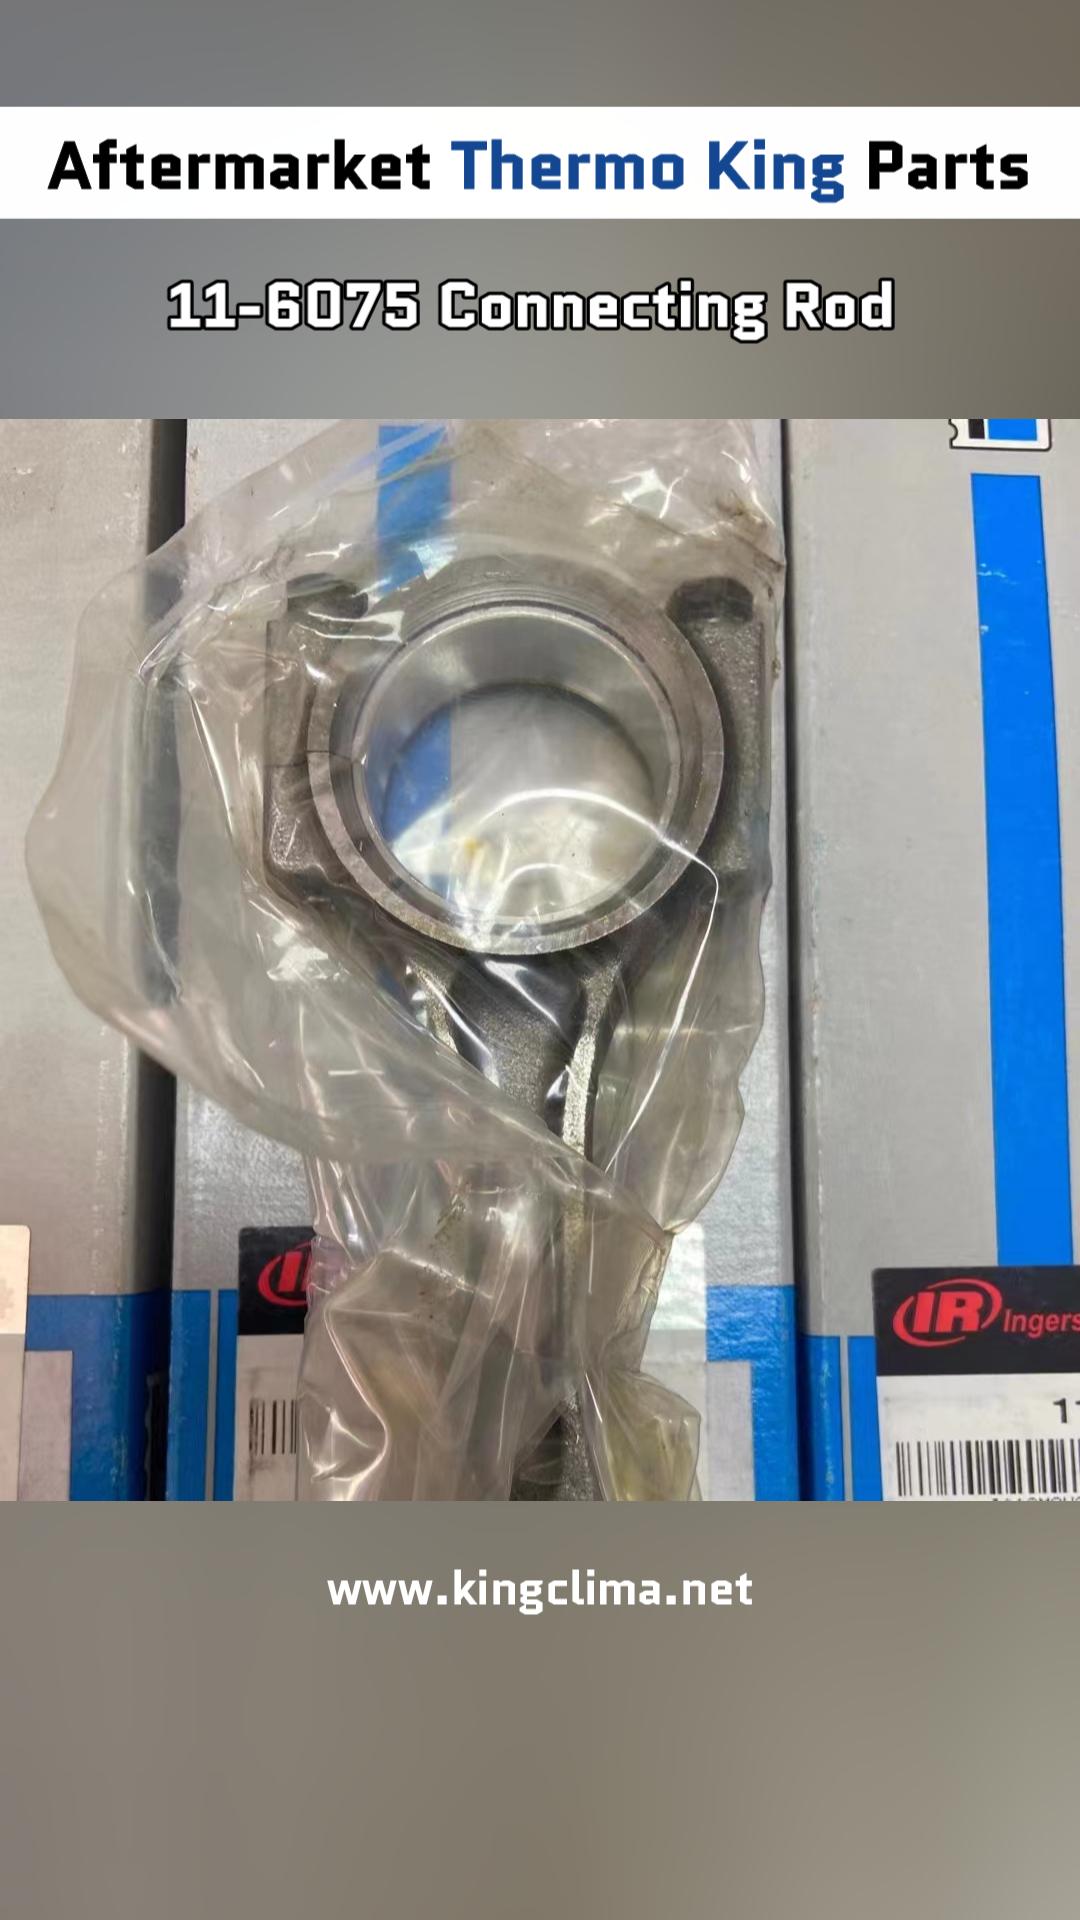 11-6075 Connecting Rod for Thermo King Parts